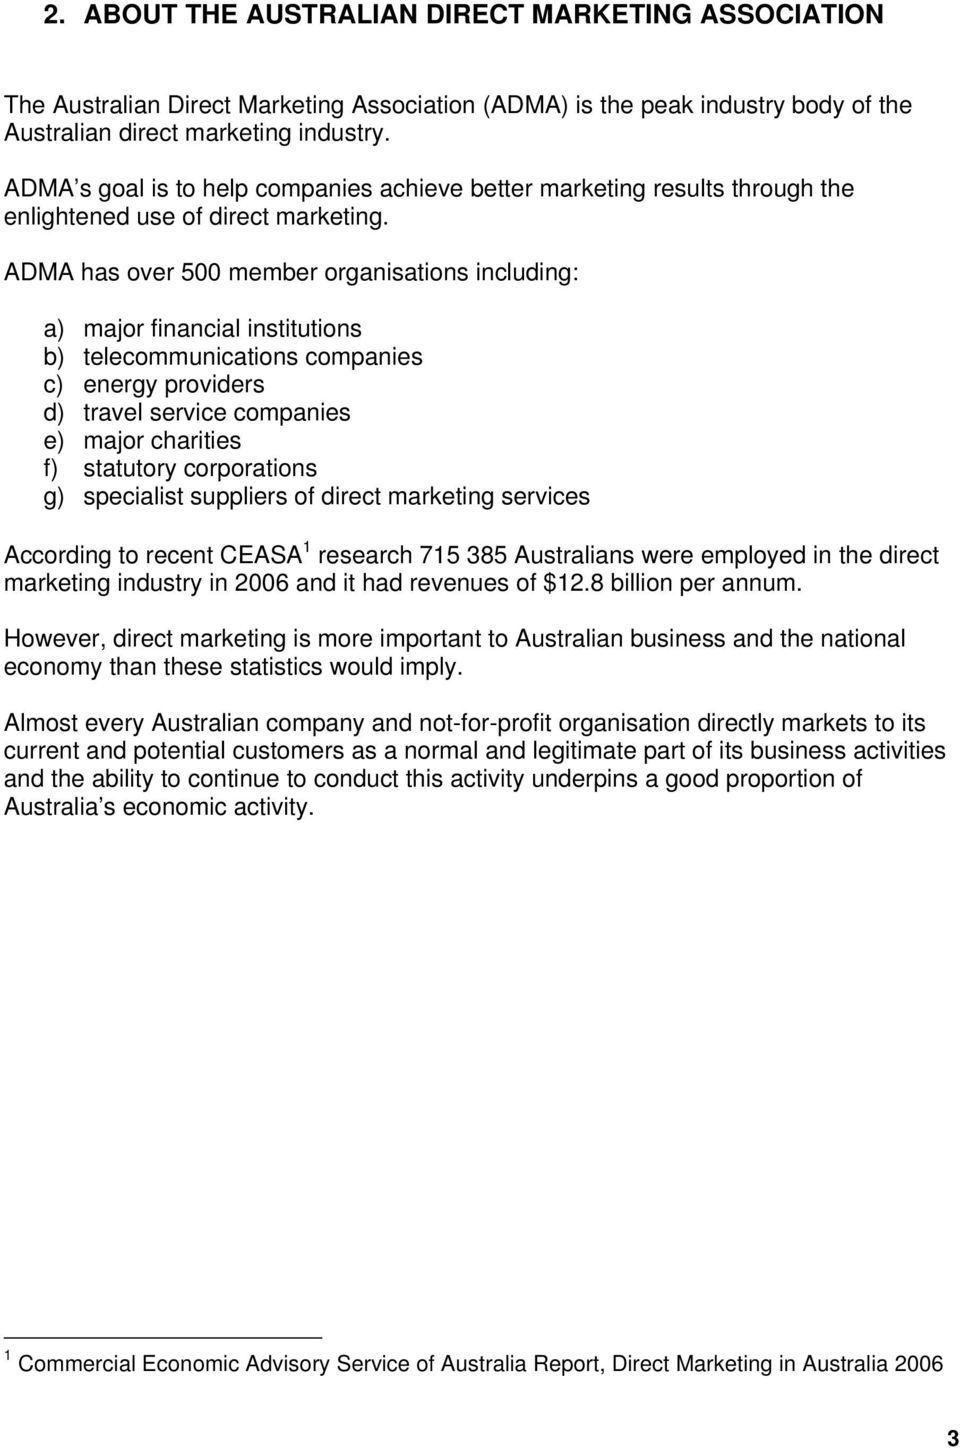 ADMA has over 500 member organisations including: a) major financial institutions b) telecommunications companies c) energy providers d) travel service companies e) major charities f) statutory